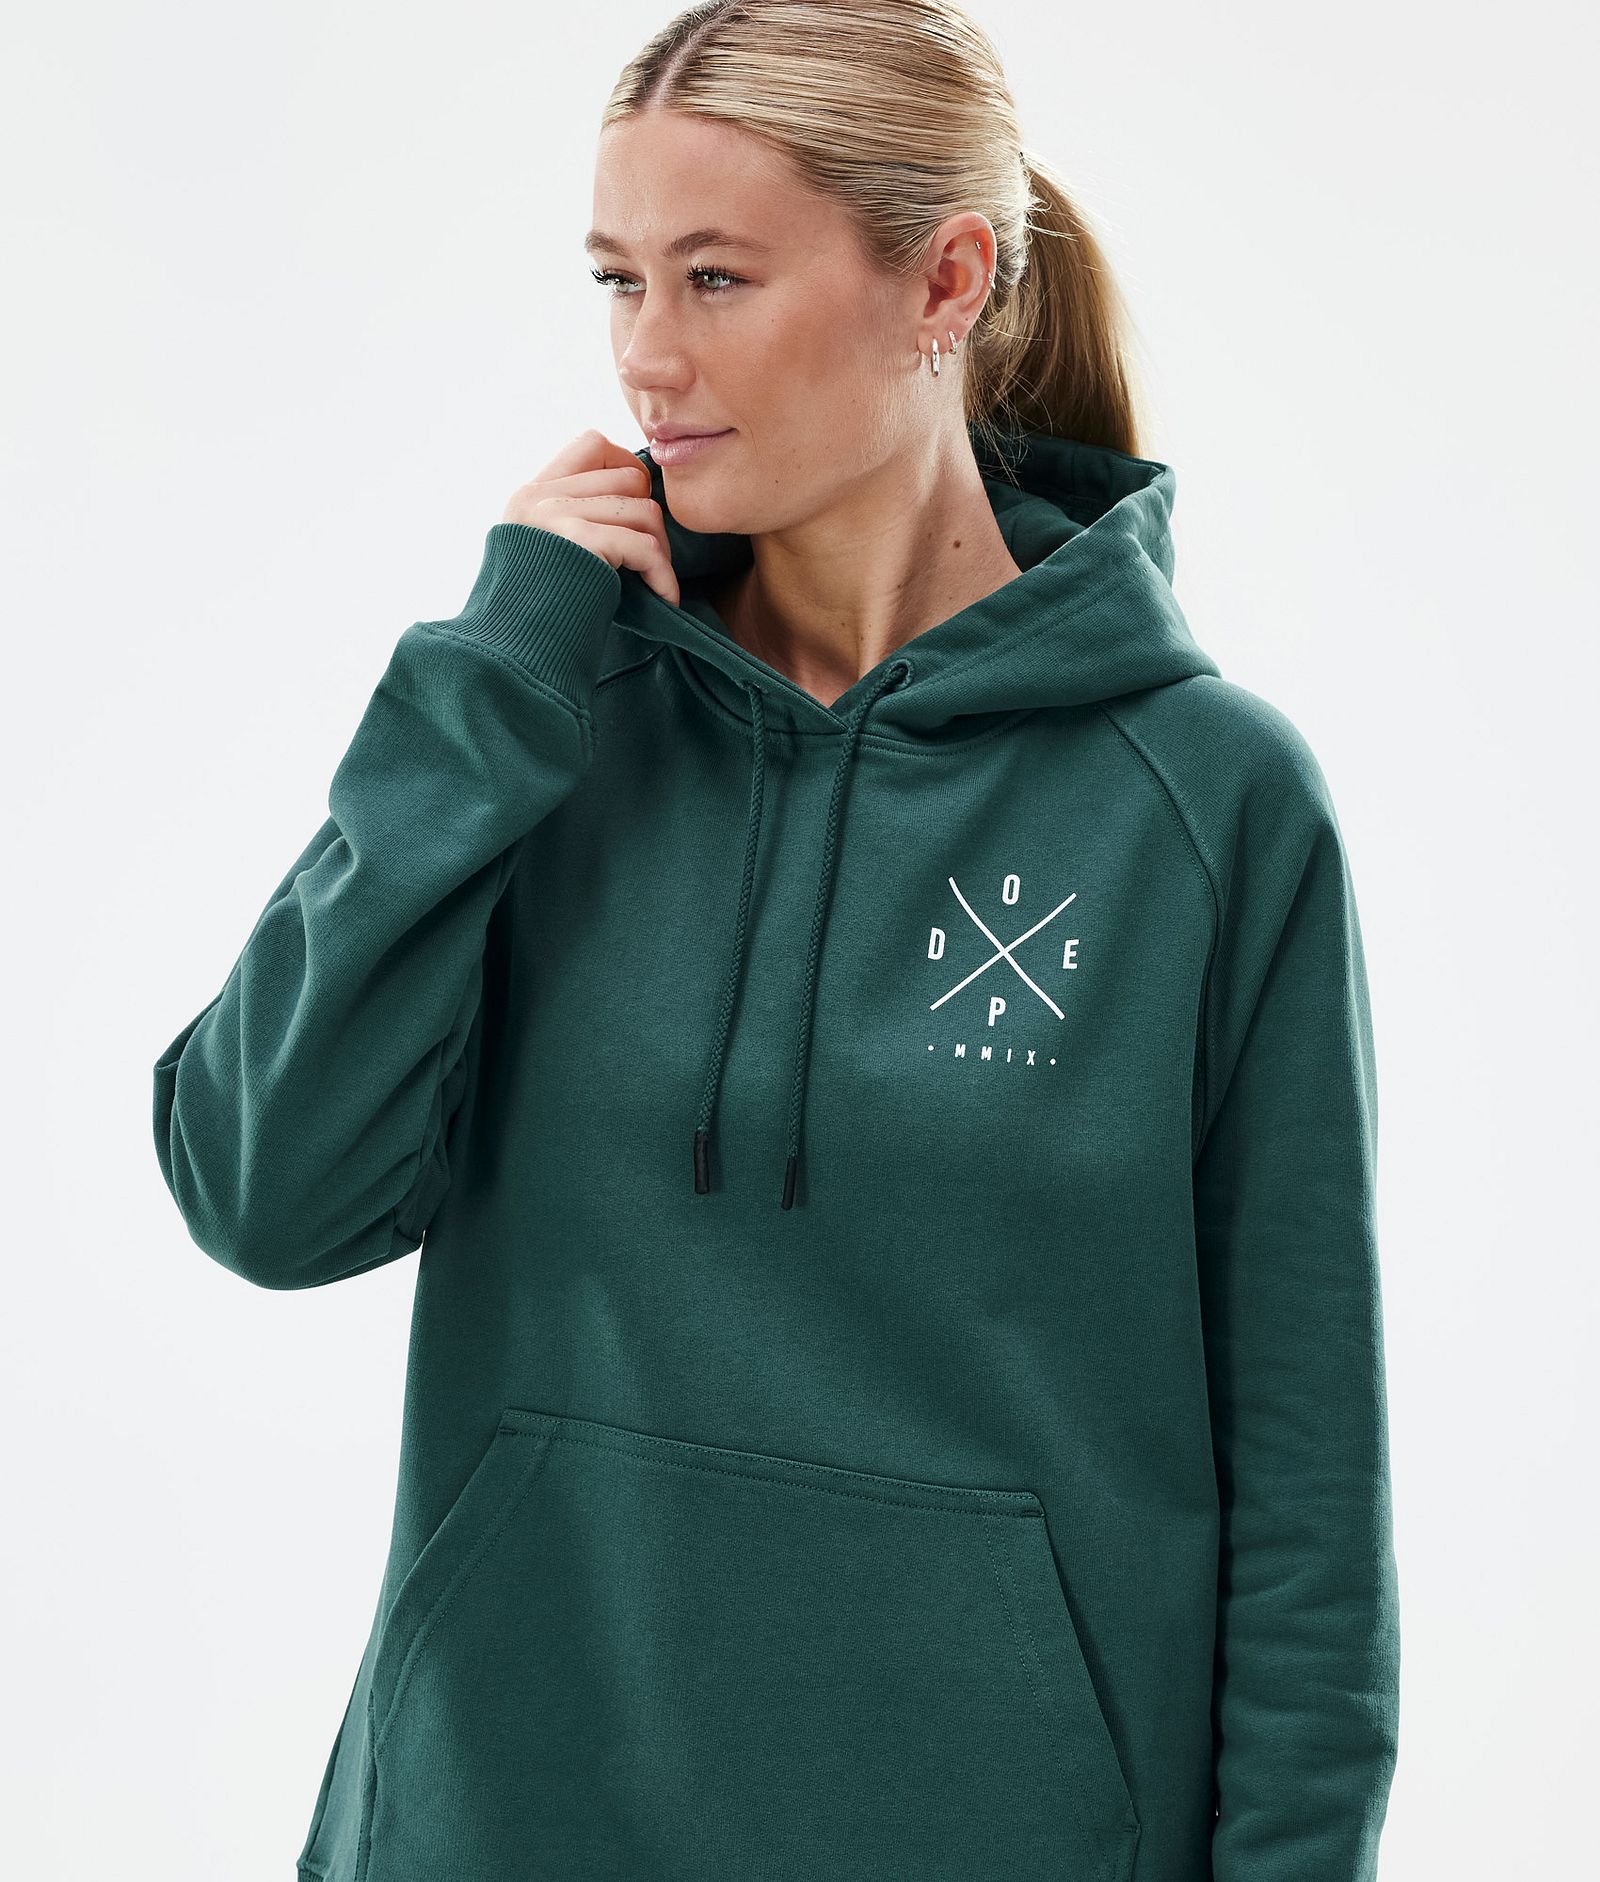 Dope Common W Sudadera con Capucha Mujer 2X-Up Bottle Green